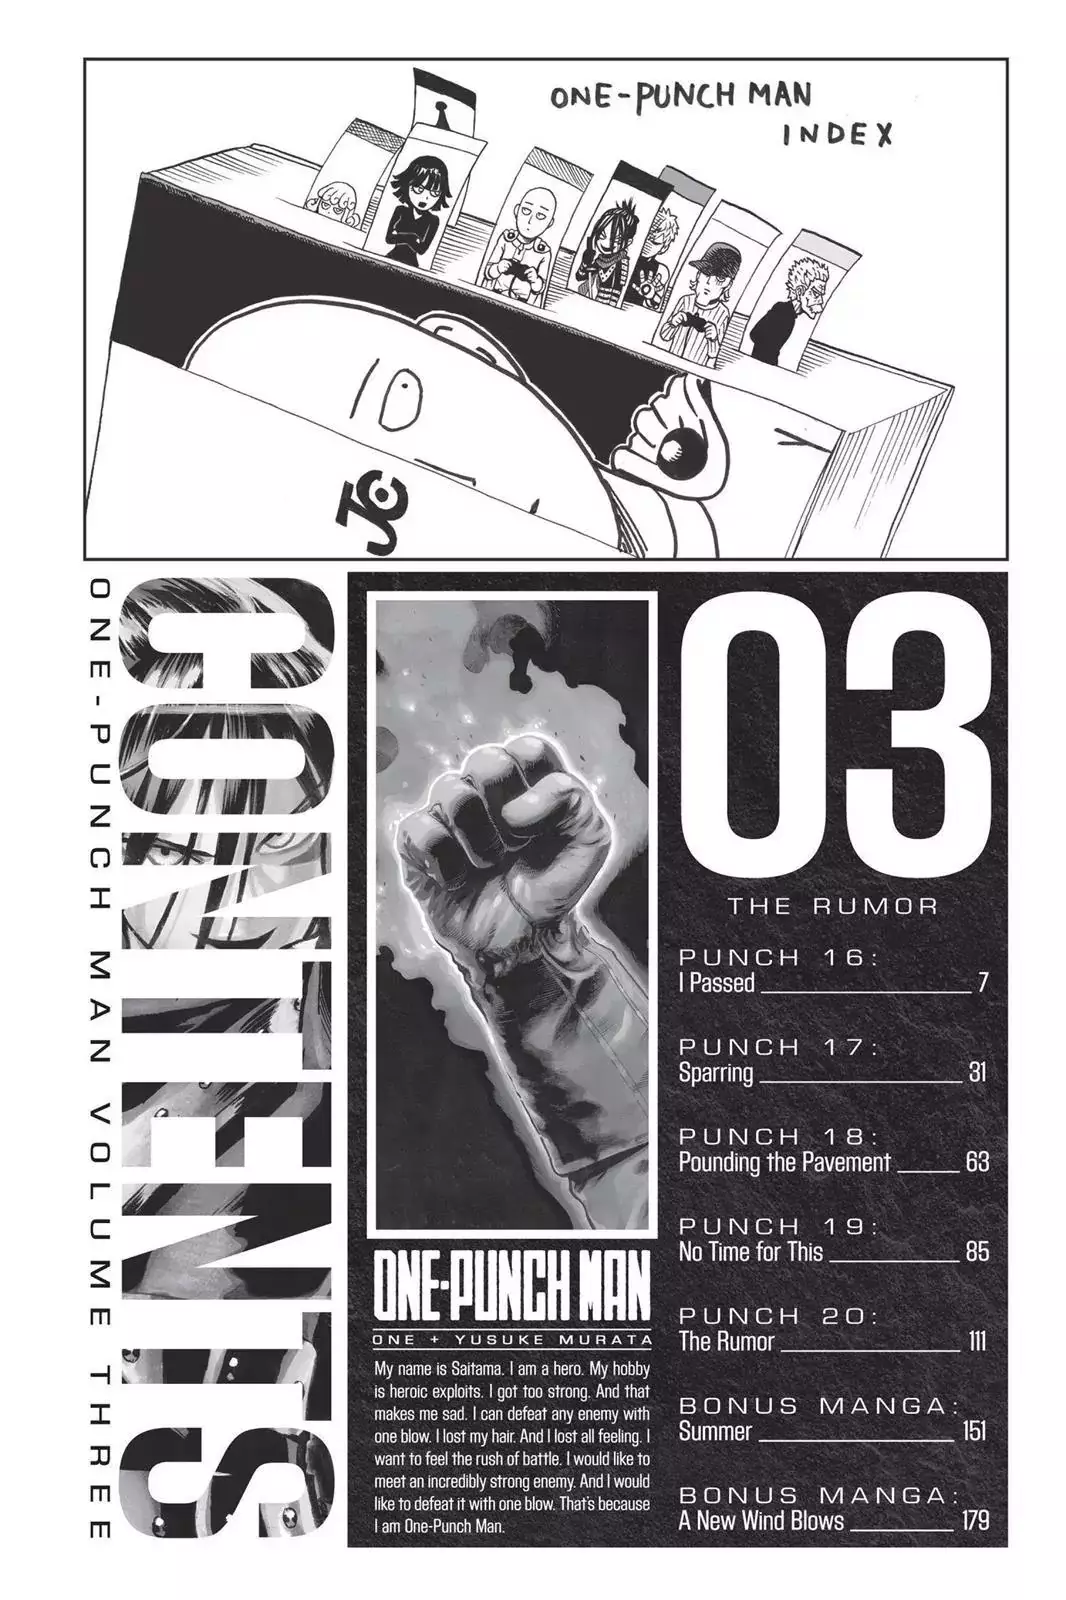 One Punch Man Chapter 16, READ One Punch Man Chapter 16 ONLINE, lost in the cloud genre,lost in the cloud gif,lost in the cloud girl,lost in the cloud goods,lost in the cloud goodreads,lost in the cloud,lost ark cloud gaming,lost odyssey cloud gaming,lost in the cloud fanart,lost in the cloud fanfic,lost in the cloud fandom,lost in the cloud first kiss,lost in the cloud font,lost in the cloud ending,lost in the cloud episode 97,lost in the cloud edit,lost in the cloud explained,lost in the cloud dog,lost in the cloud discord server,lost in the cloud desktop wallpaper,lost in the cloud drawing,can't find my cloud on network,lost in the cloud characters,lost in the cloud chapter 93 release date,lost in the cloud birthday,lost in the cloud birthday art,lost in the cloud background,lost in the cloud banner,lost in the clouds meaning,what is the black cloud in lost,lost in the cloud ao3,lost in the cloud anime,lost in the cloud art,lost in the cloud author twitter,lost in the cloud author instagram,lost in the cloud artist,lost in the cloud acrylic stand,lost in the cloud artist twitter,lost in the cloud art style,lost in the cloud analysis